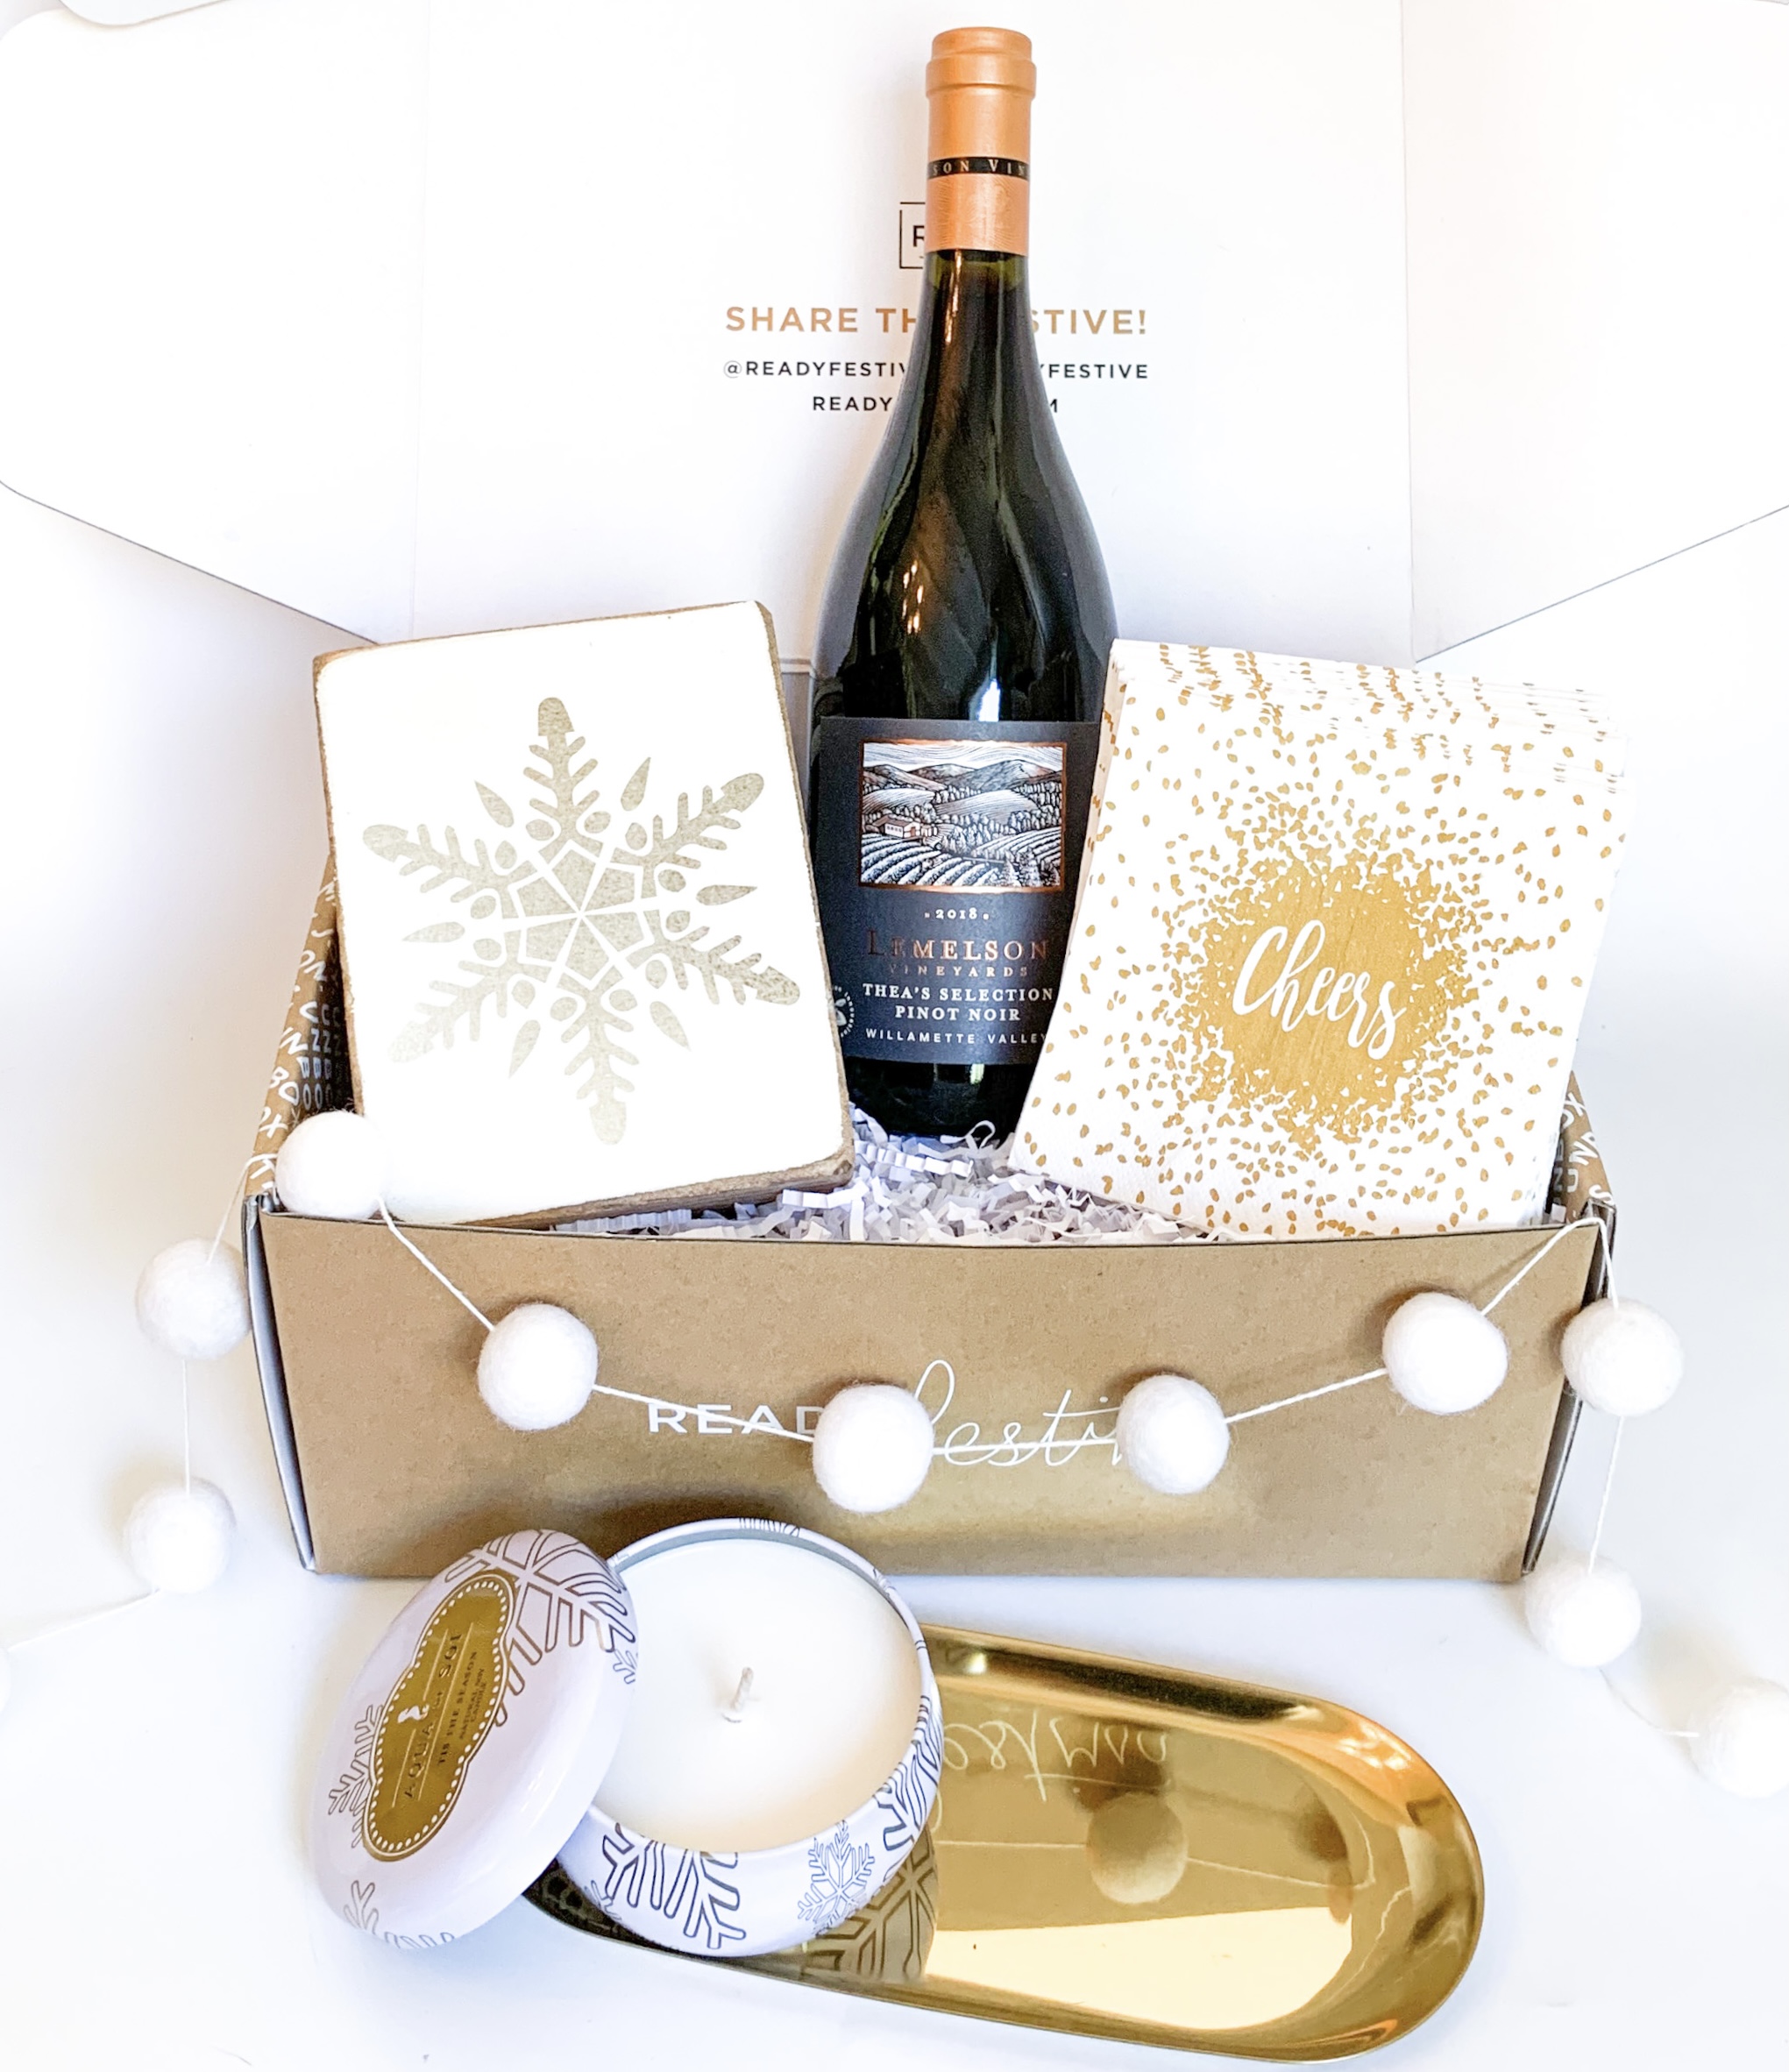 Wine Gifts and Sommelier-Curated Wine Gift Sets